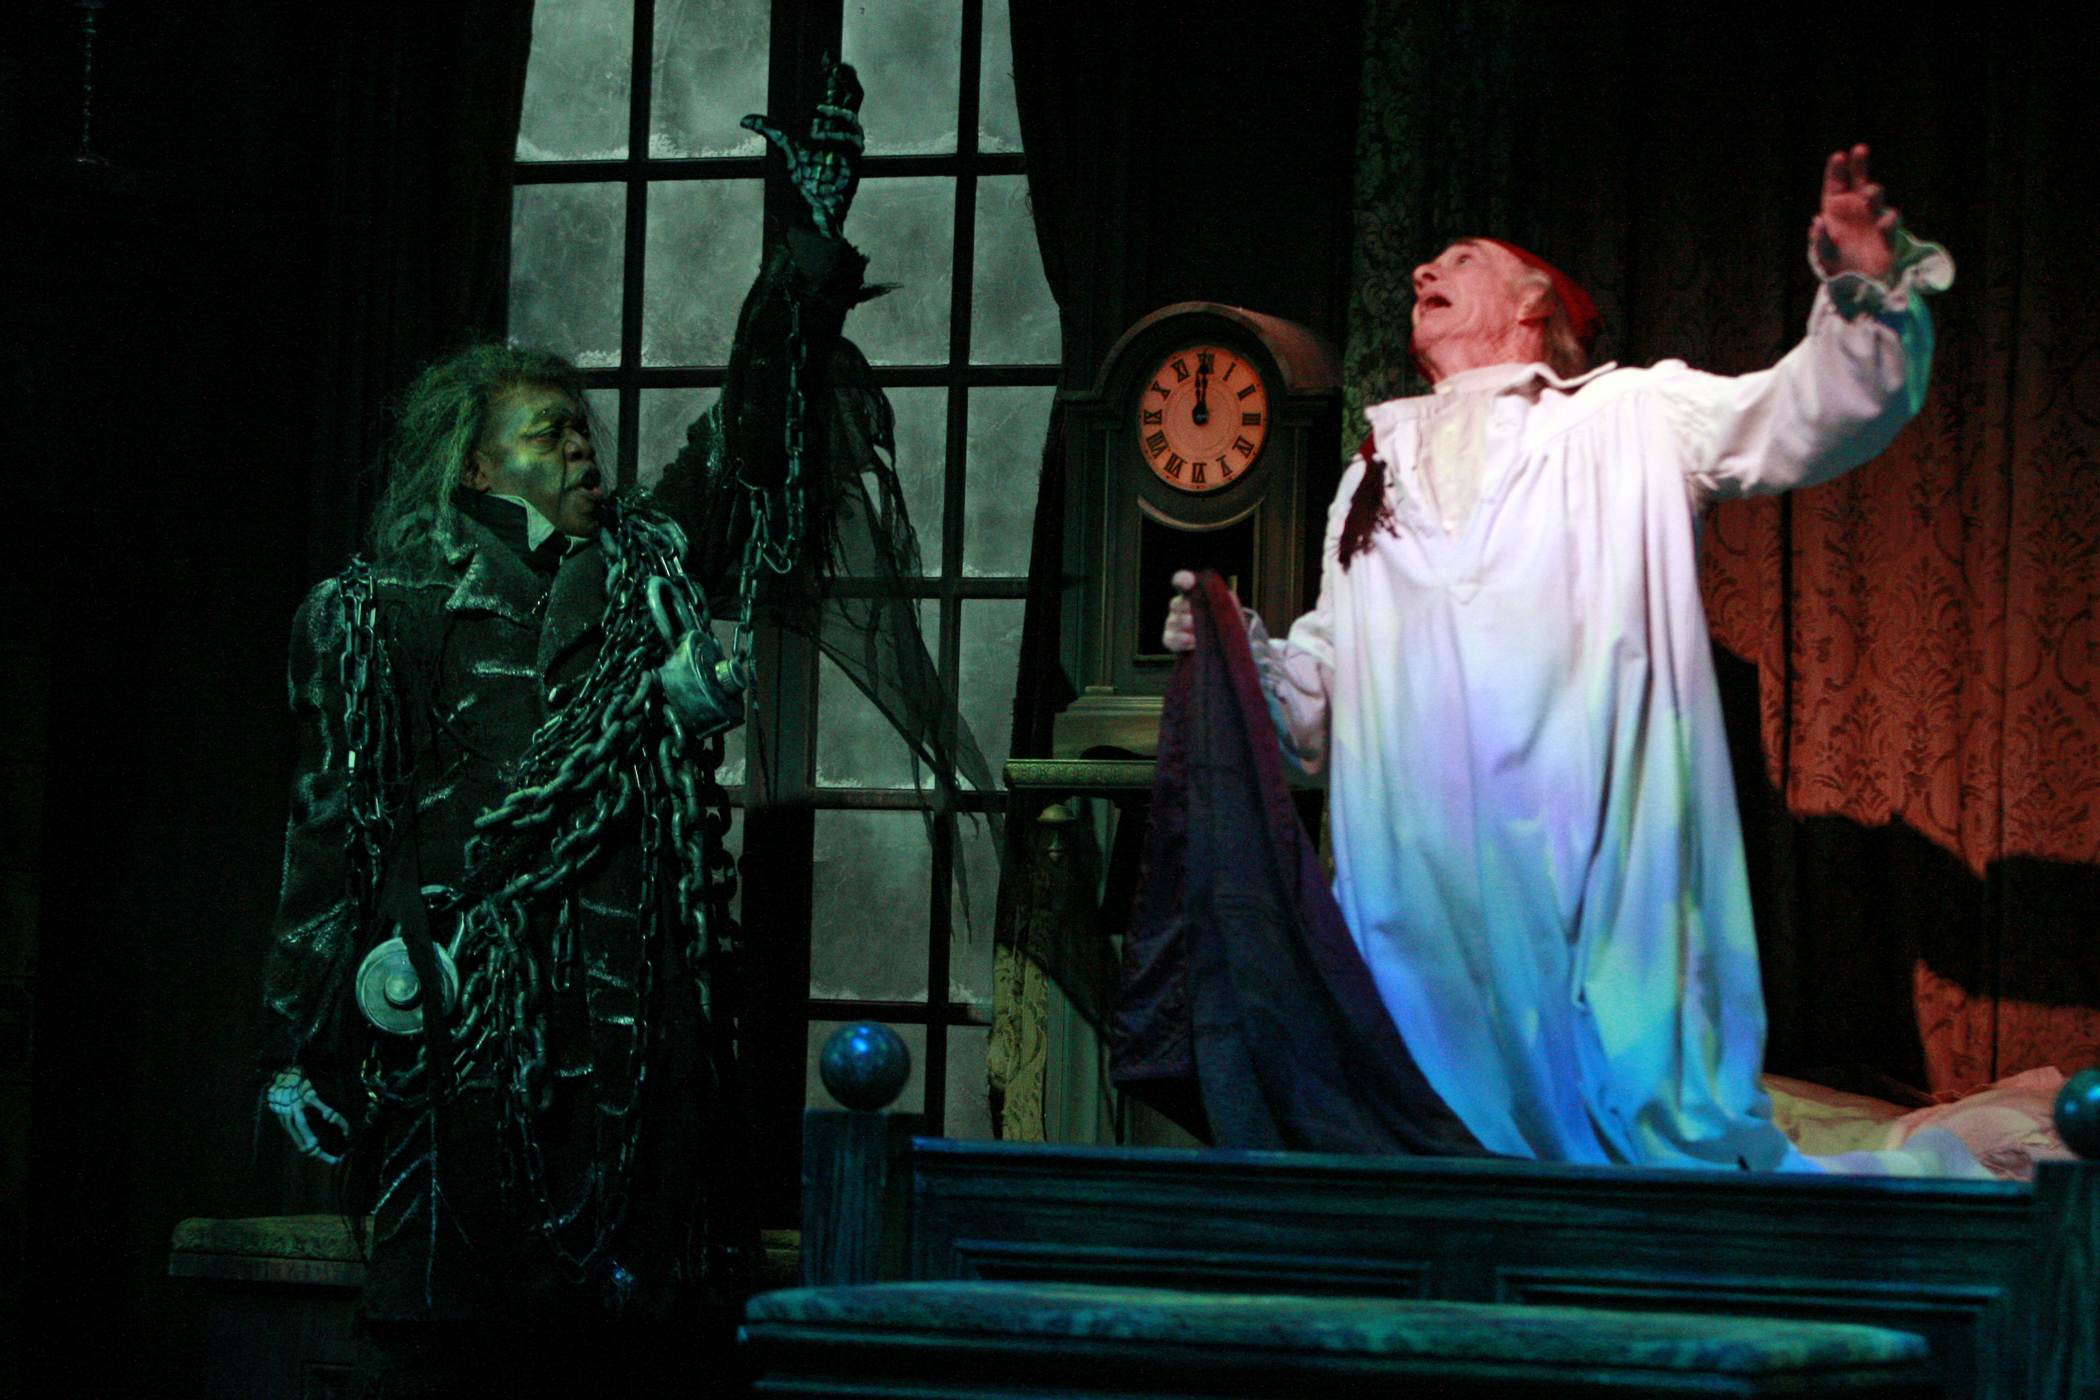 A Christmas Carol at South Coast Repertory with Family and Friends